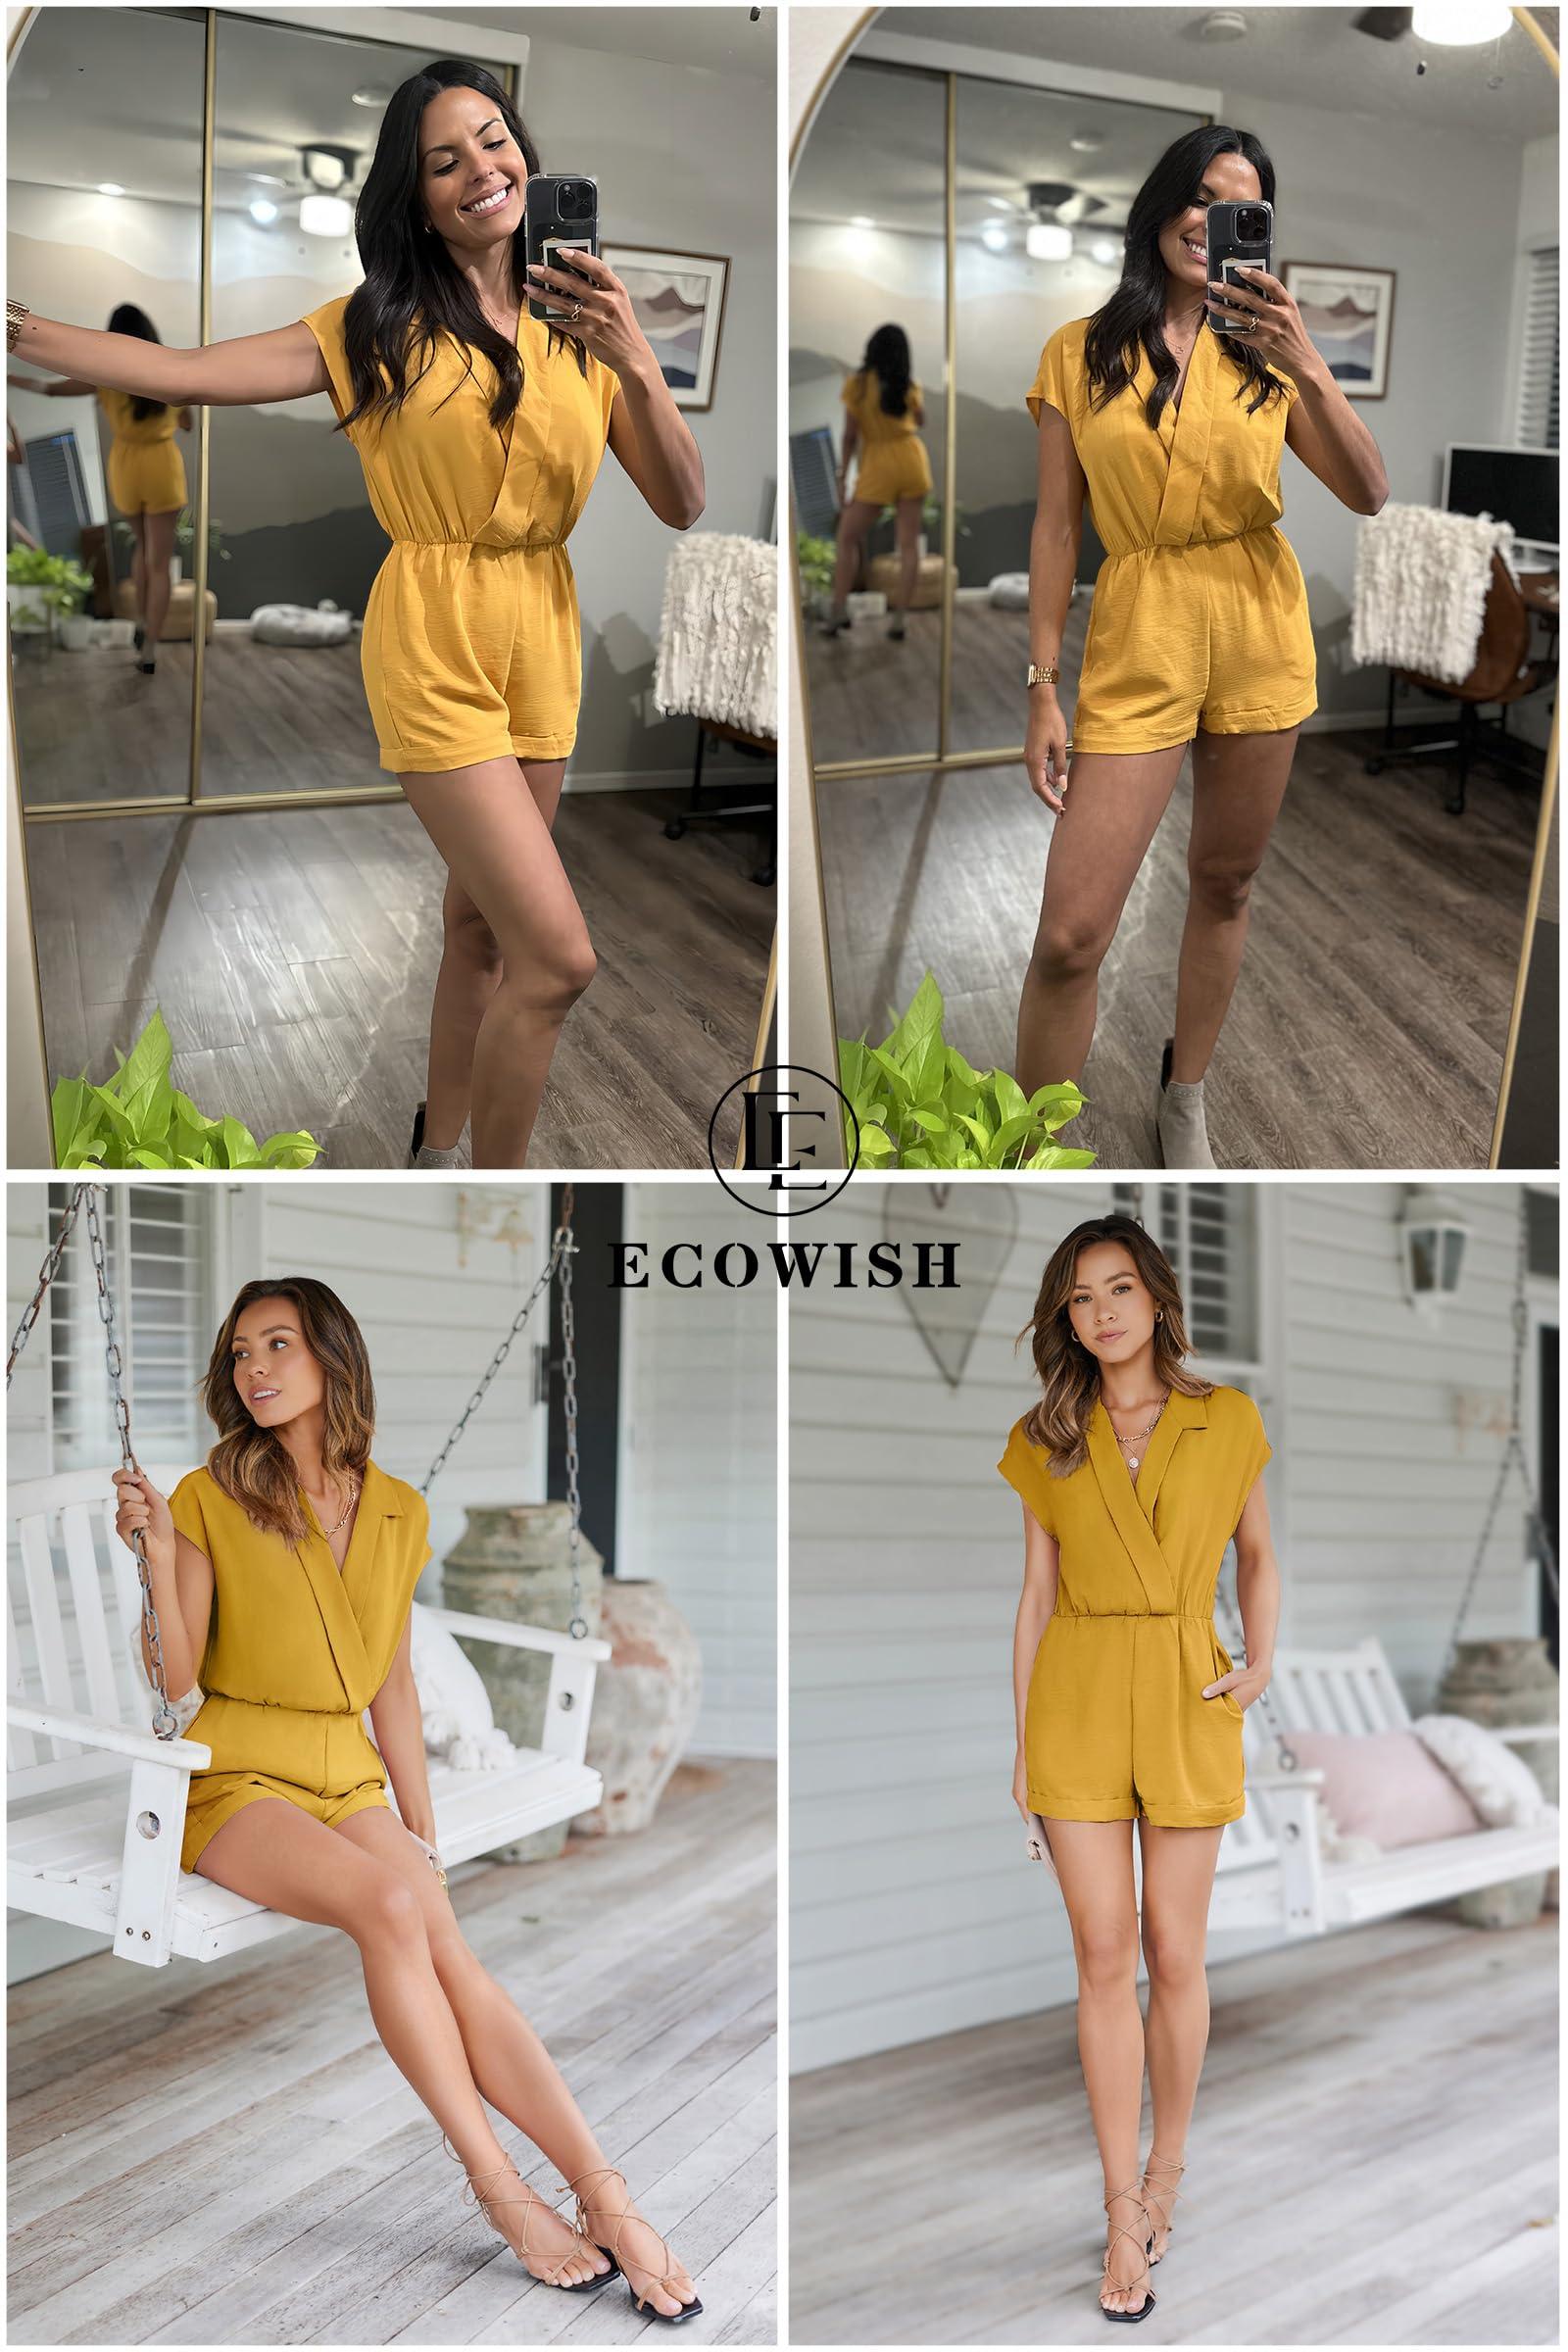 ECOWISH Women's Rompers Summer Short Sleeve Jumpsuits V Neck Lapel Collared One Piece Playsuit Outfits with Pockets 322 Yellow Large - Bona Fide Fashion